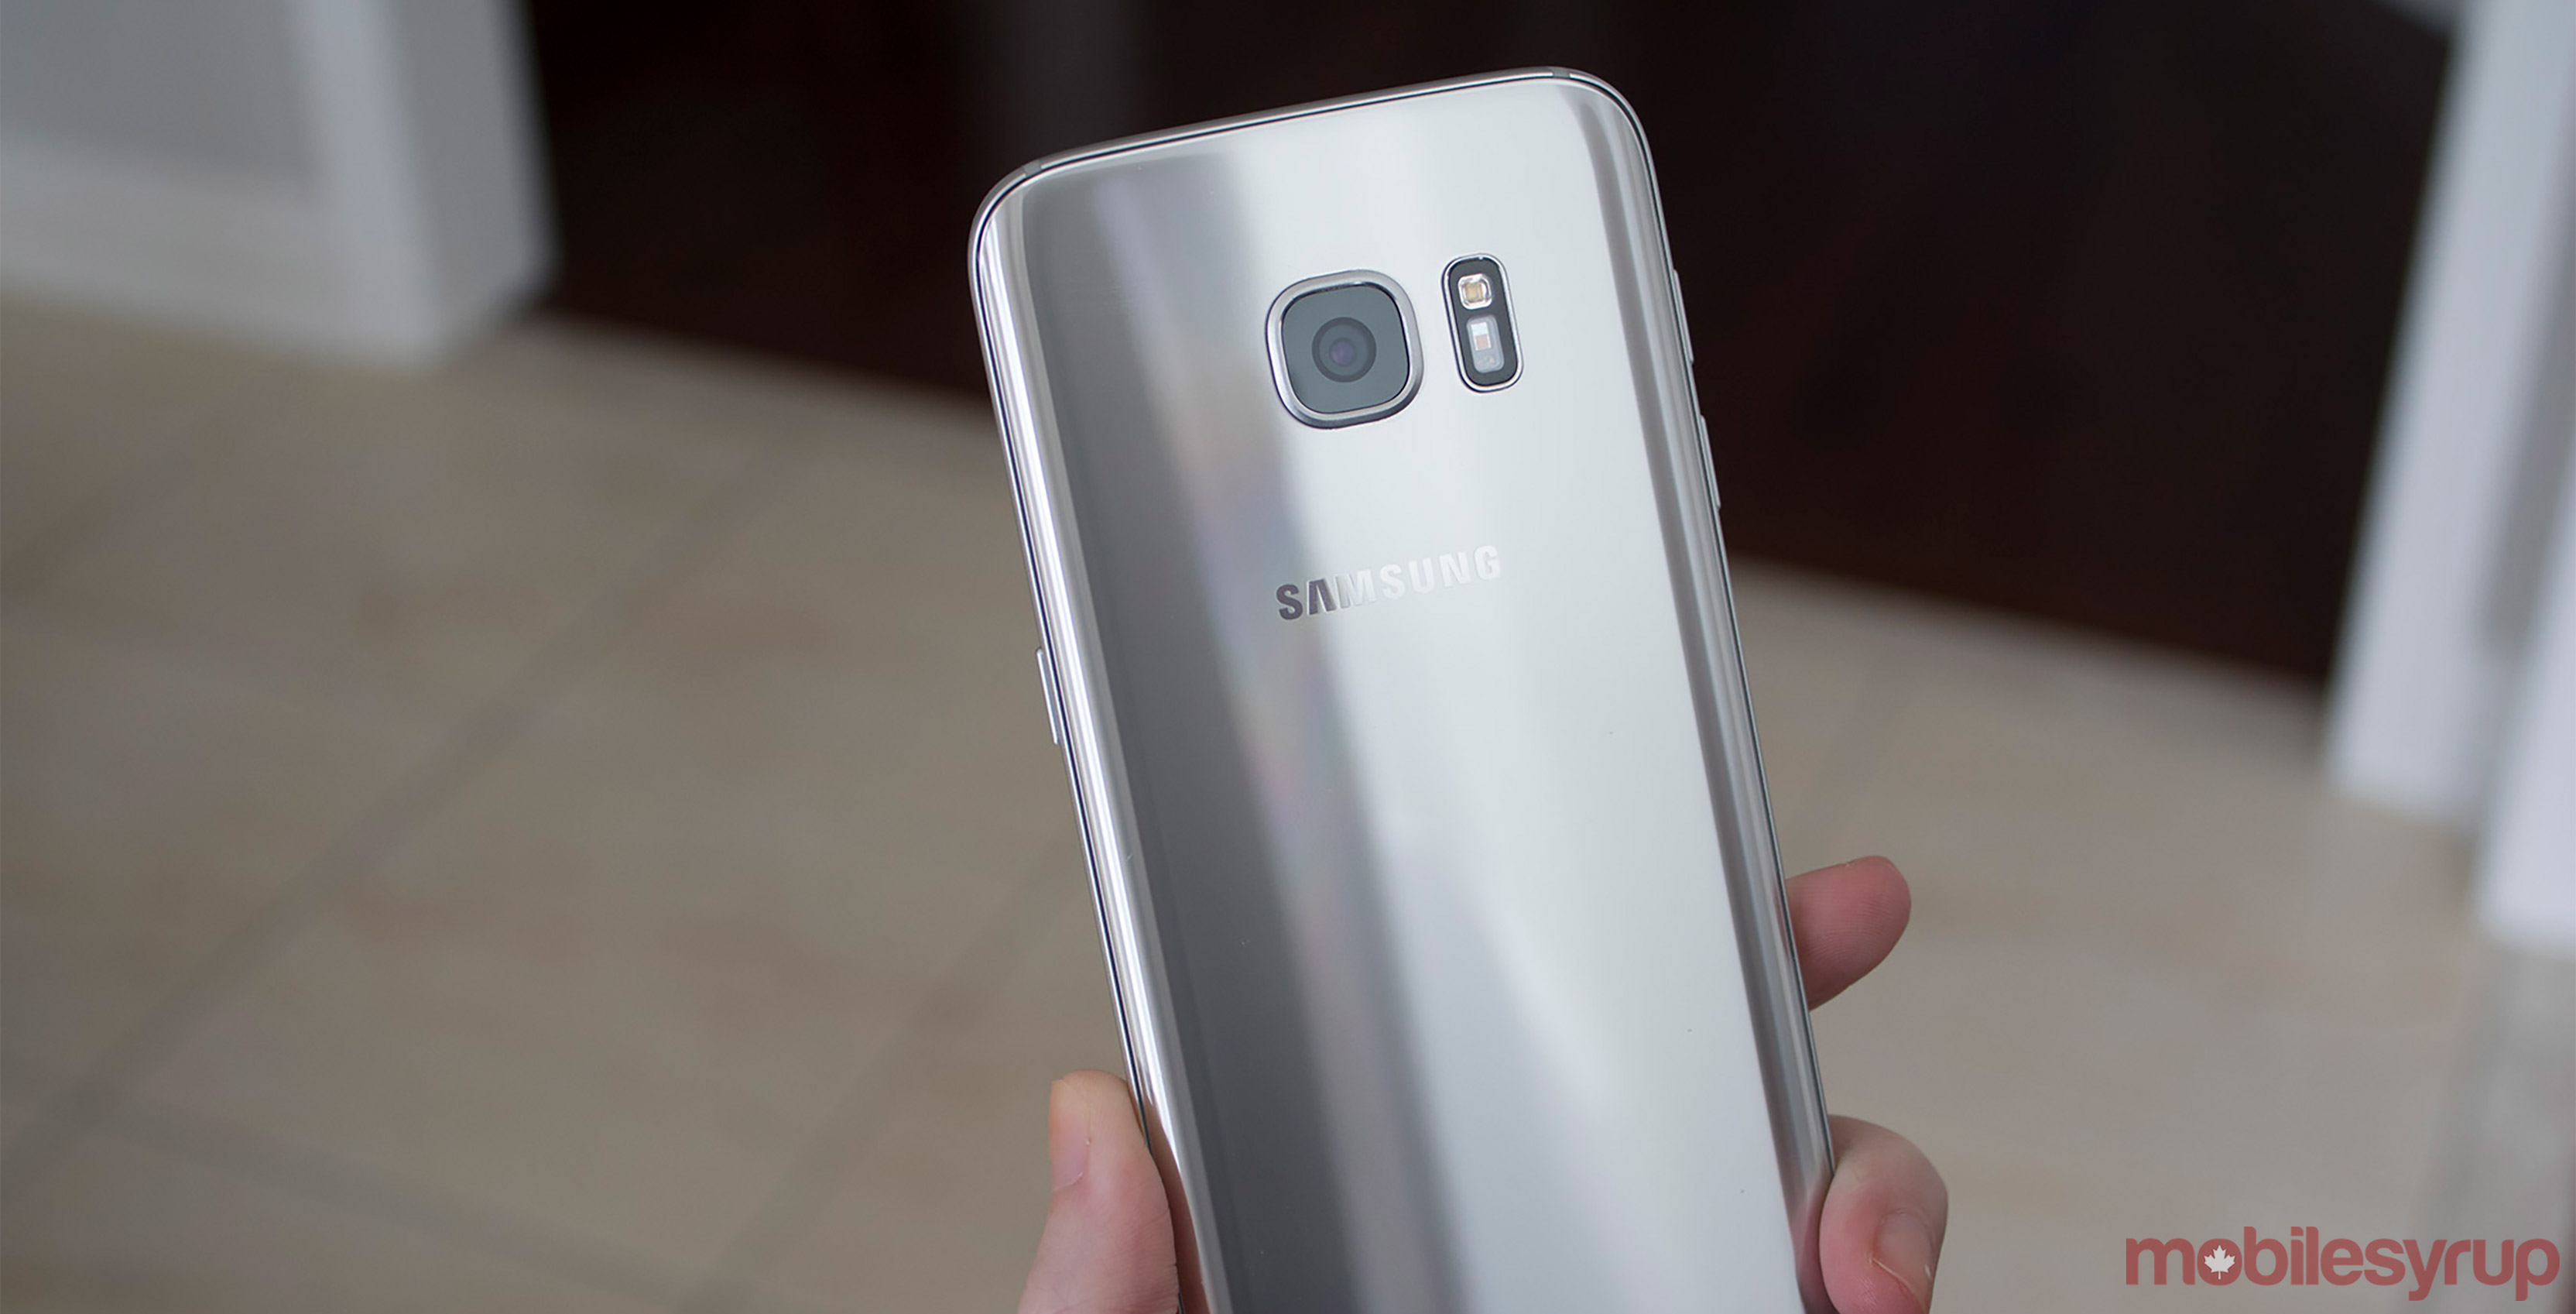 Galaxy S7 Smartphone - Samsung Galaxy S8 is revealed